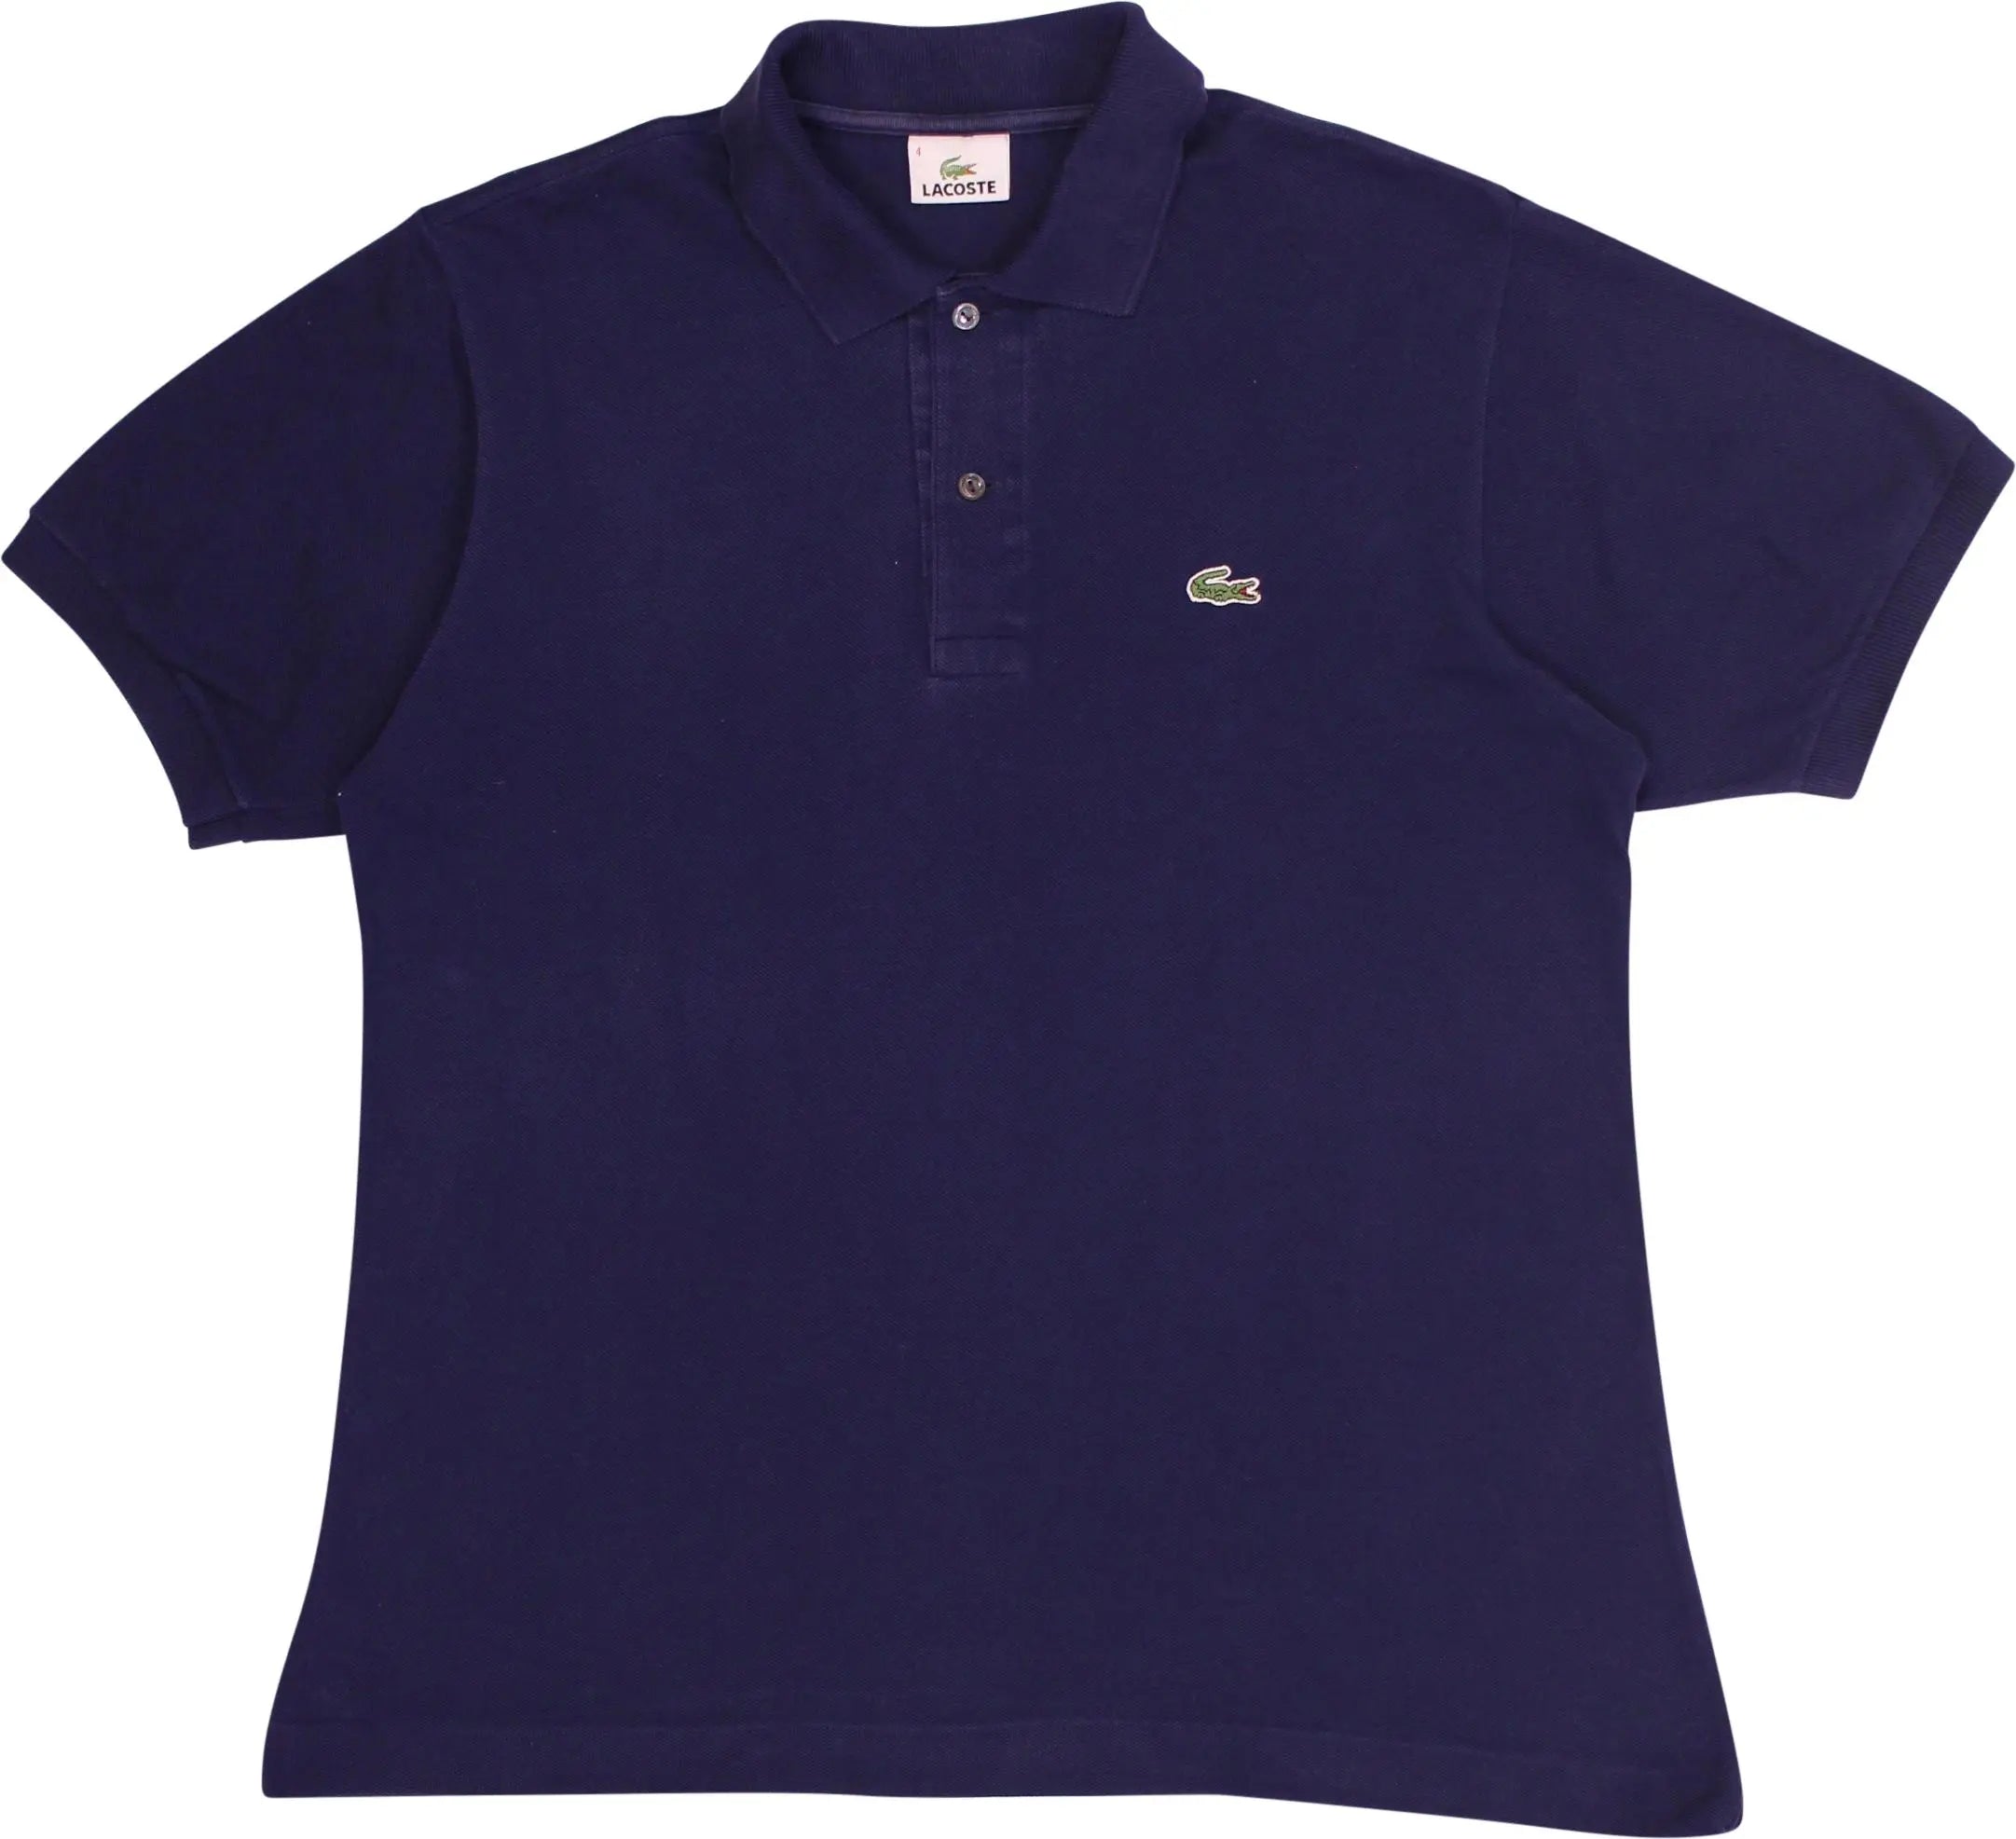 Lacoste - Blue Polo Shirt by Lacoste- ThriftTale.com - Vintage and second handclothing